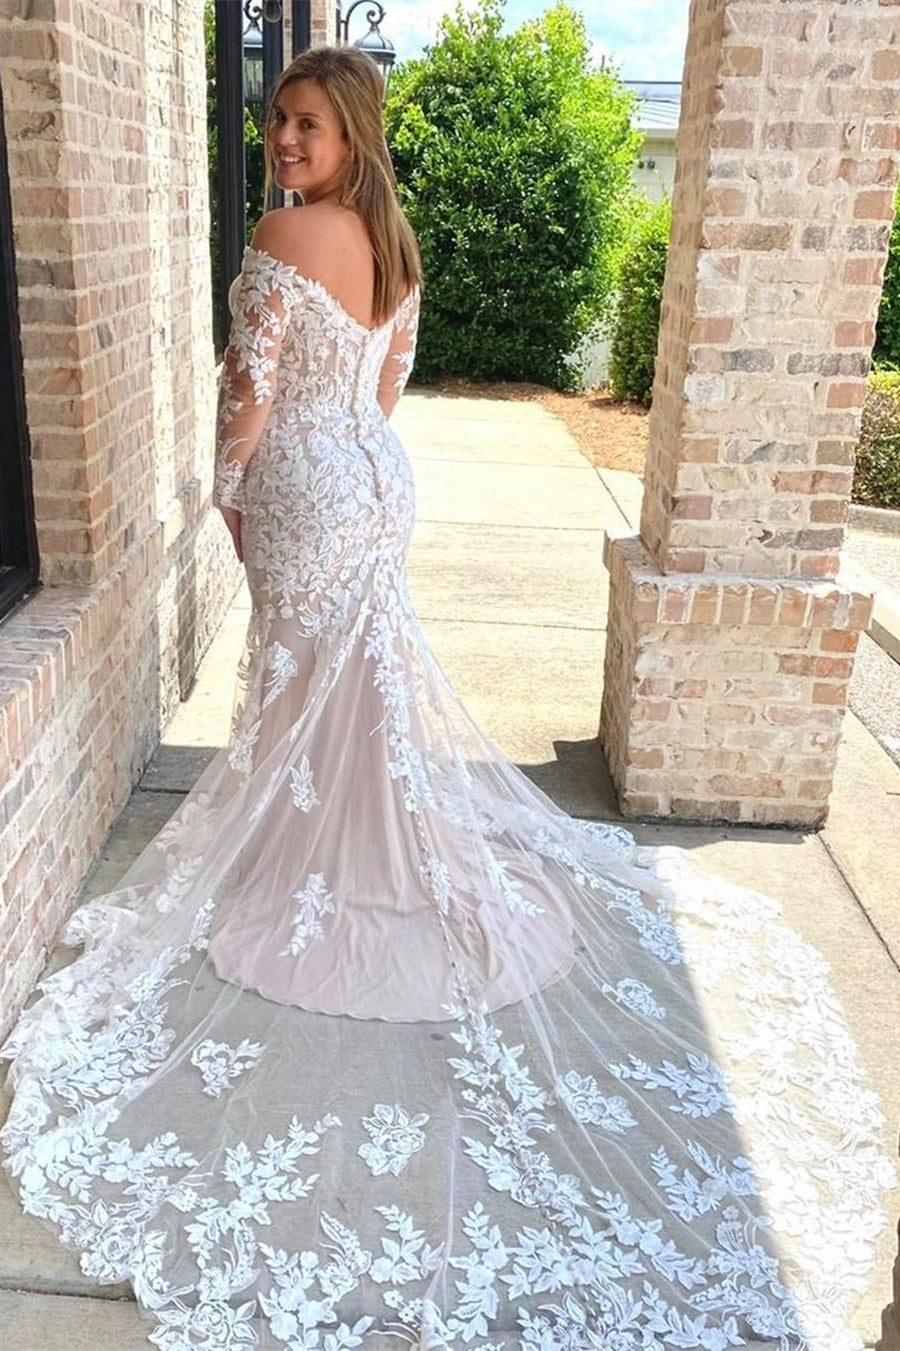 White Lace Off-the-Shoulder Long Sleeve Mermaid Wedding Dress